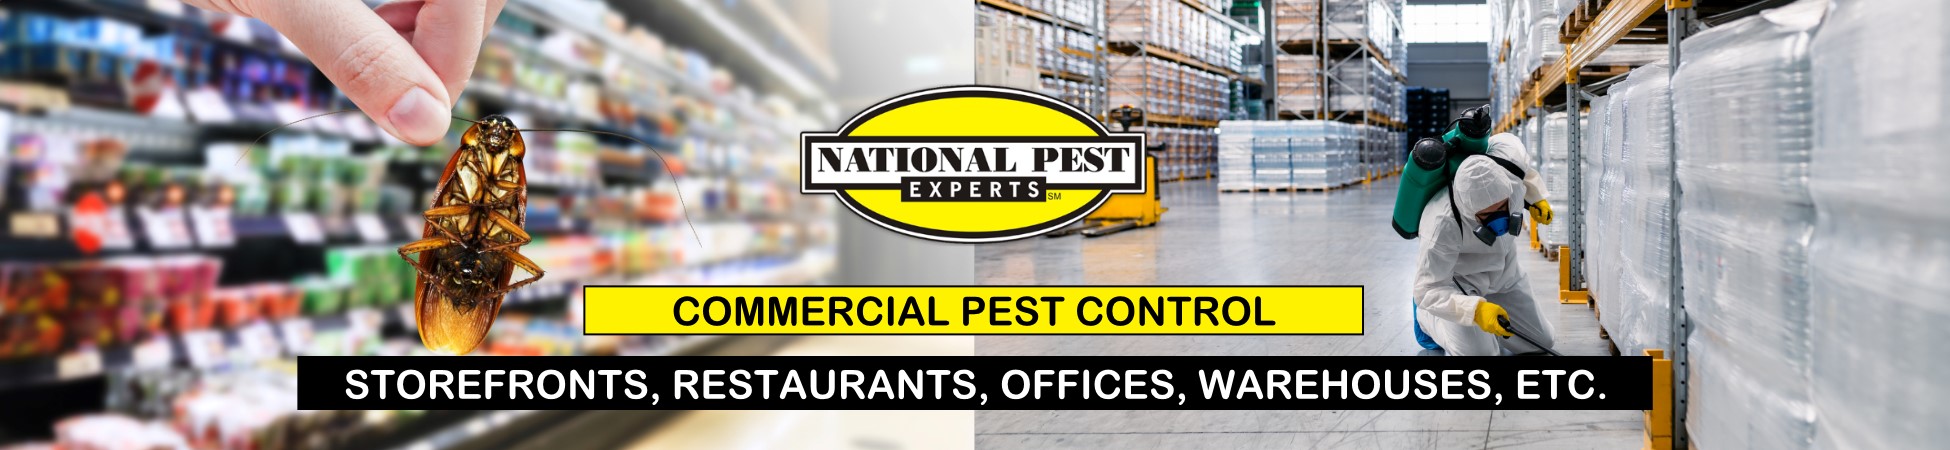 National Pest Experts - Commercial & Industrial exterminating and pest control in Commack, NY